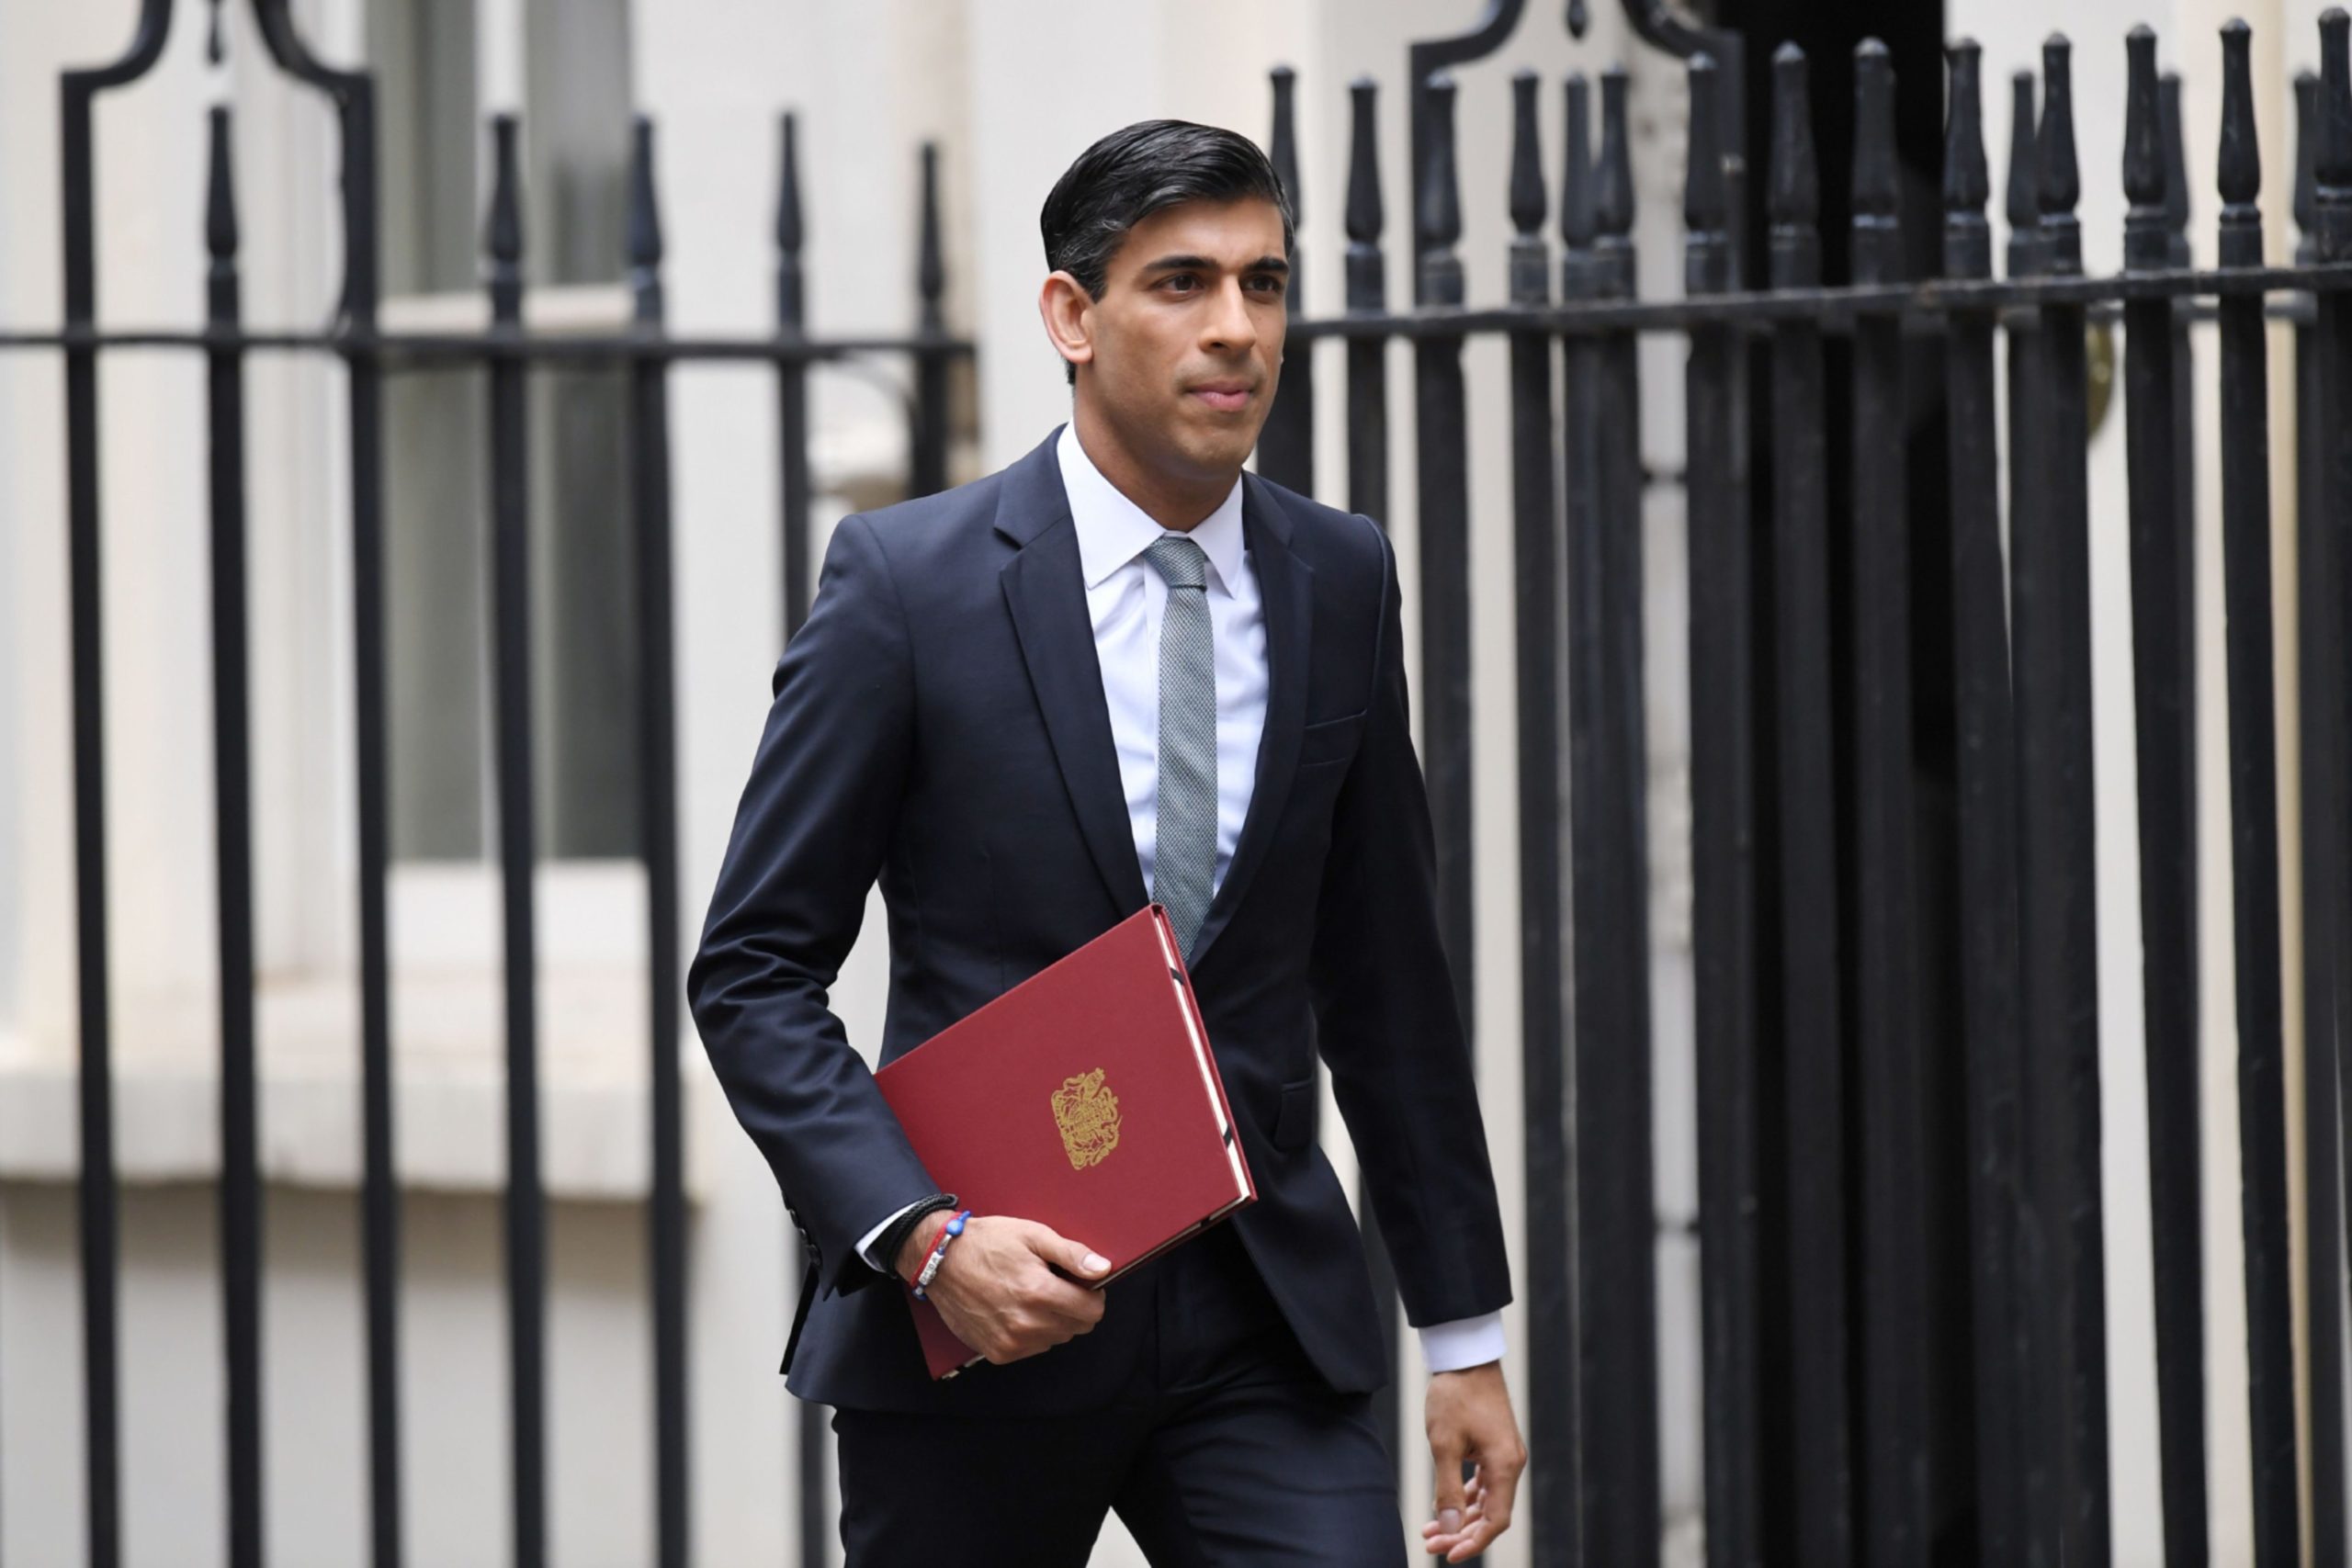 Rishi Sunak, Chancellor of the Exchequer.